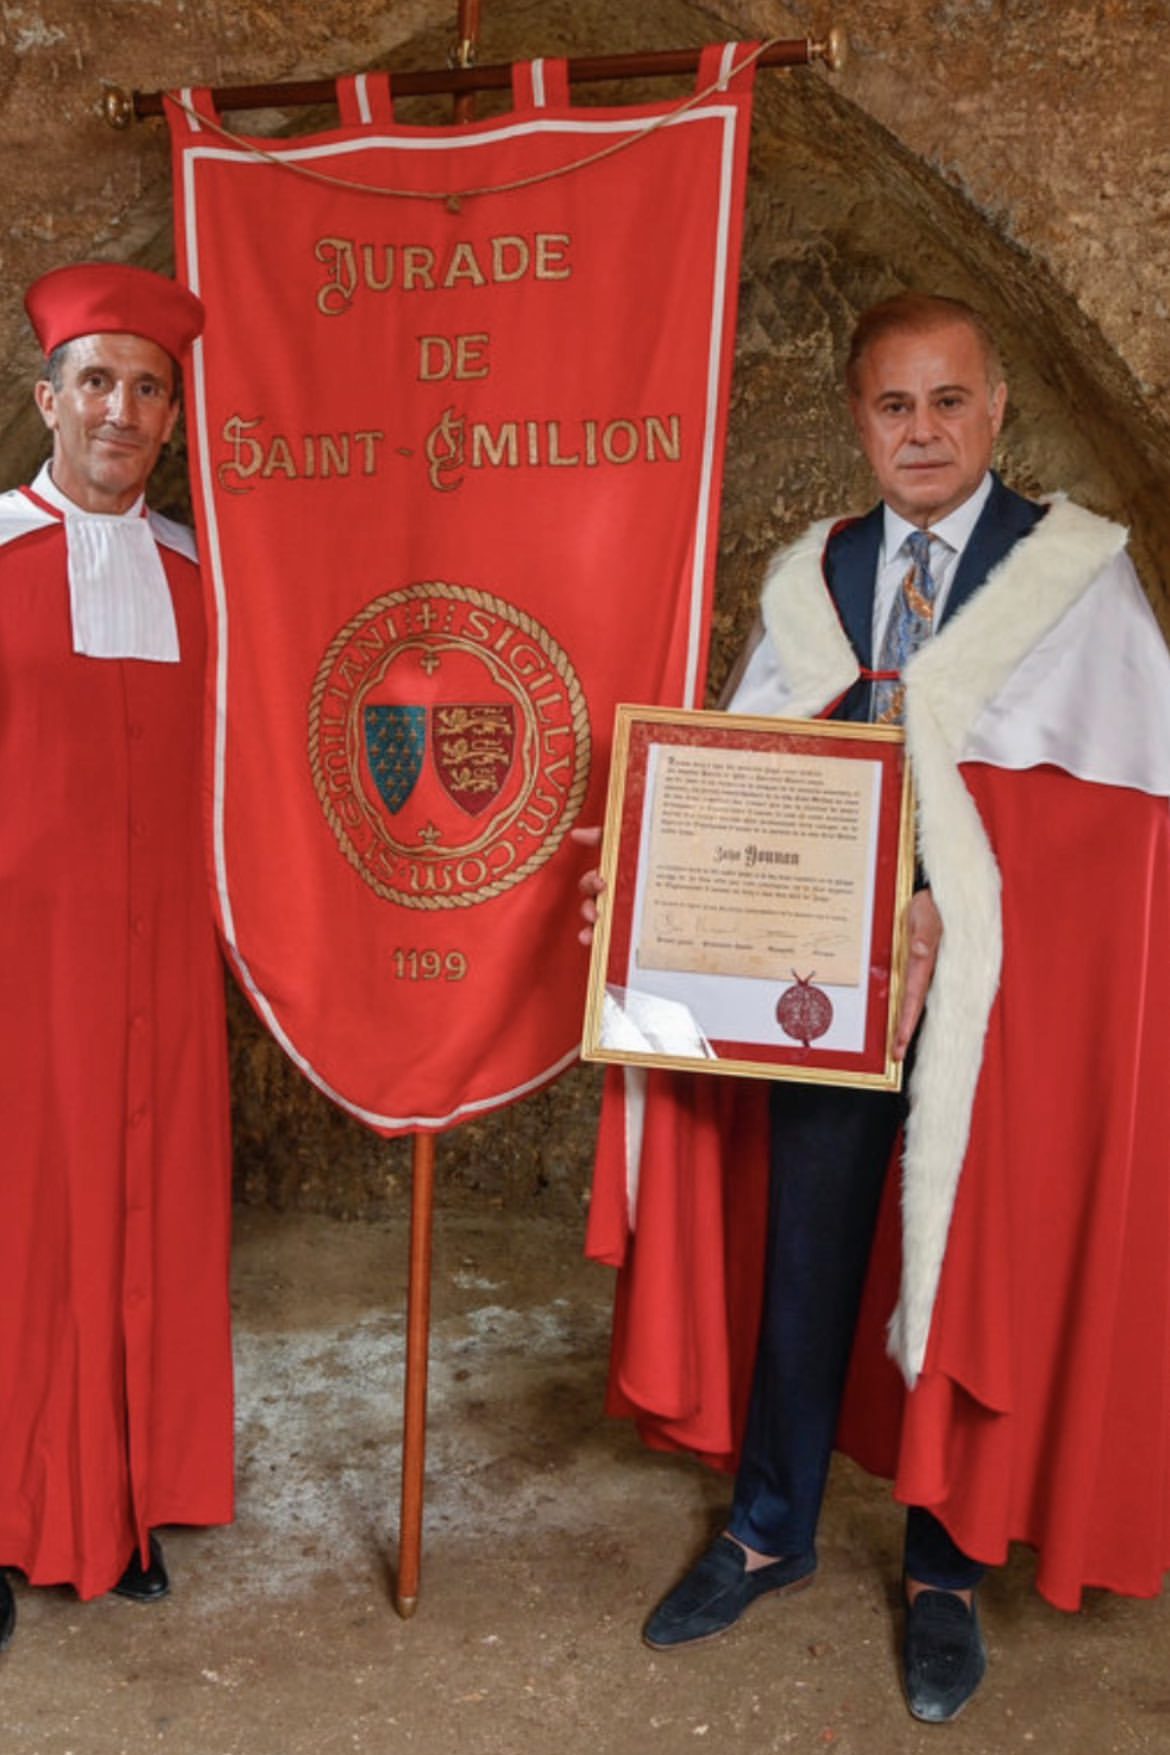 Zaya YounanFirst American Winemaker inducted into French Jurade of Saint-Emilion